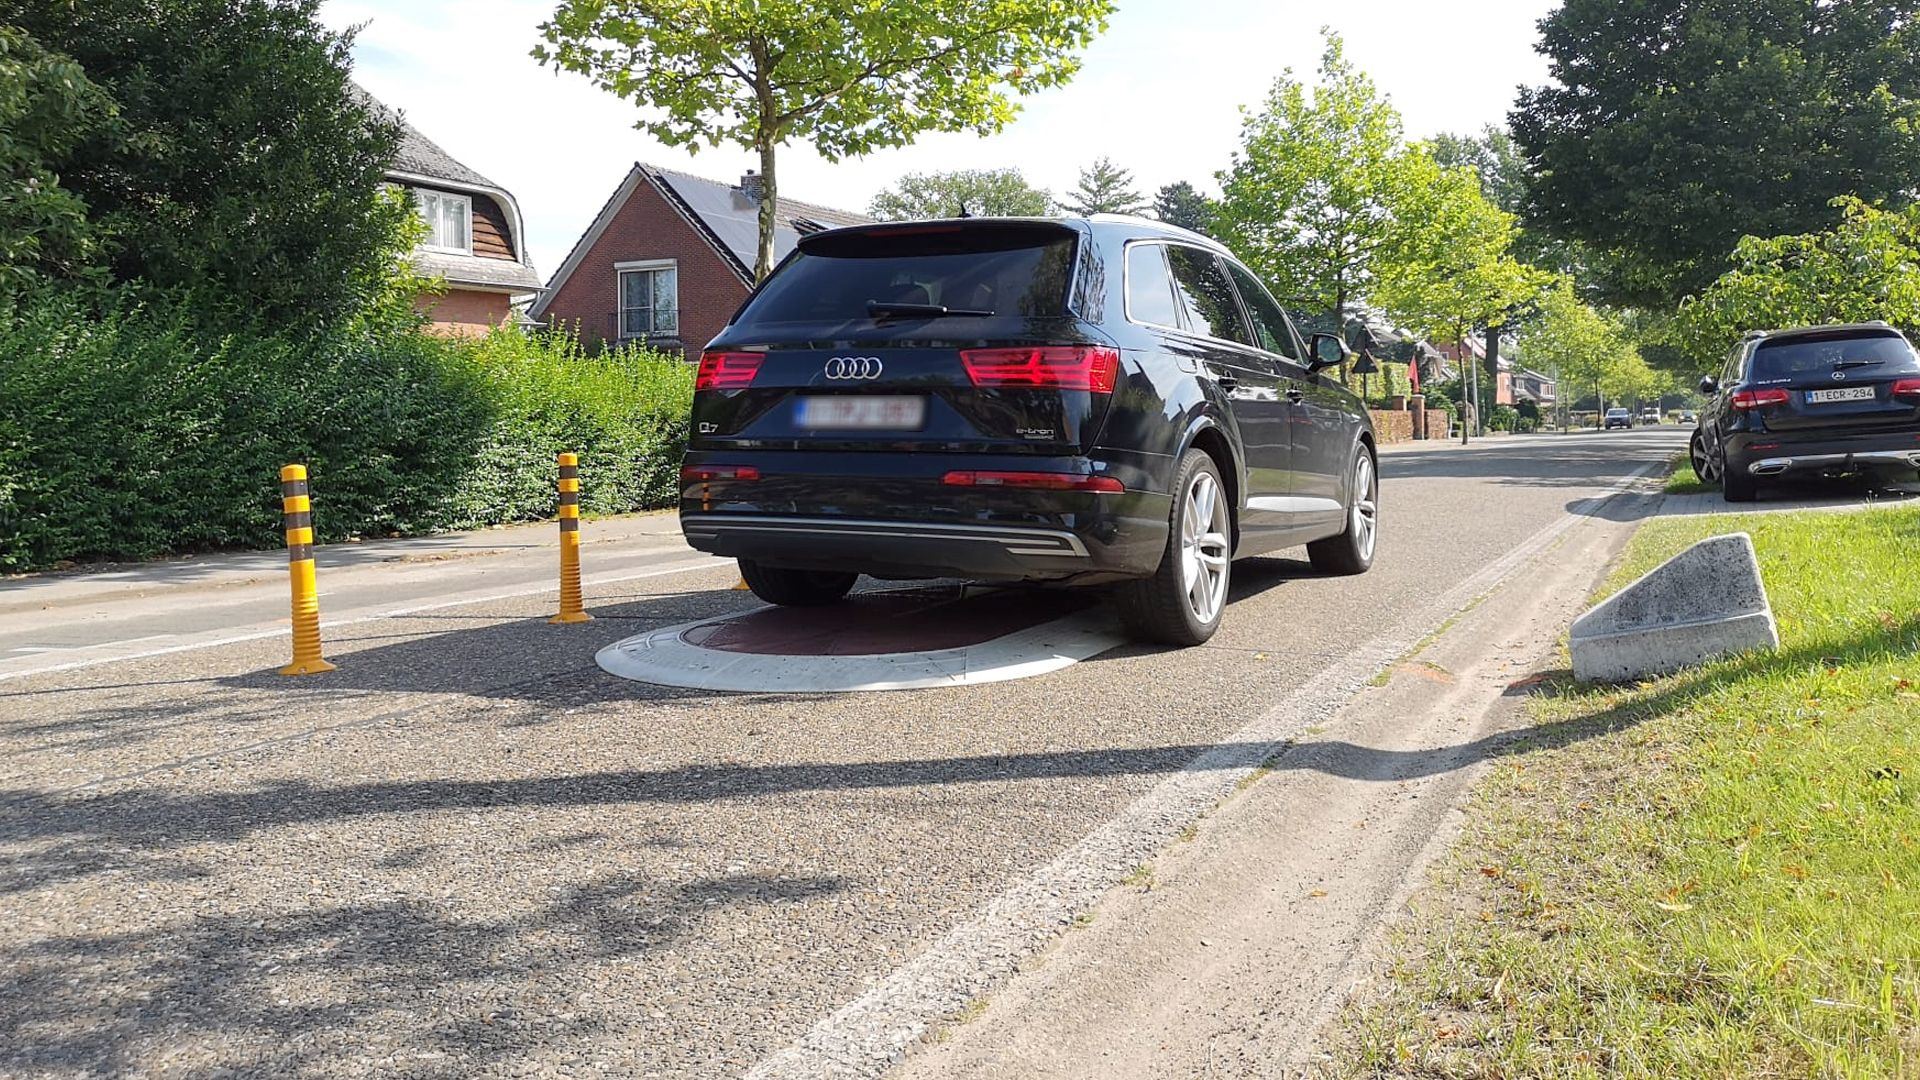 Road cushions, posts and concrete blocks should make the road between Oud-Turnhout and Ravels safer.